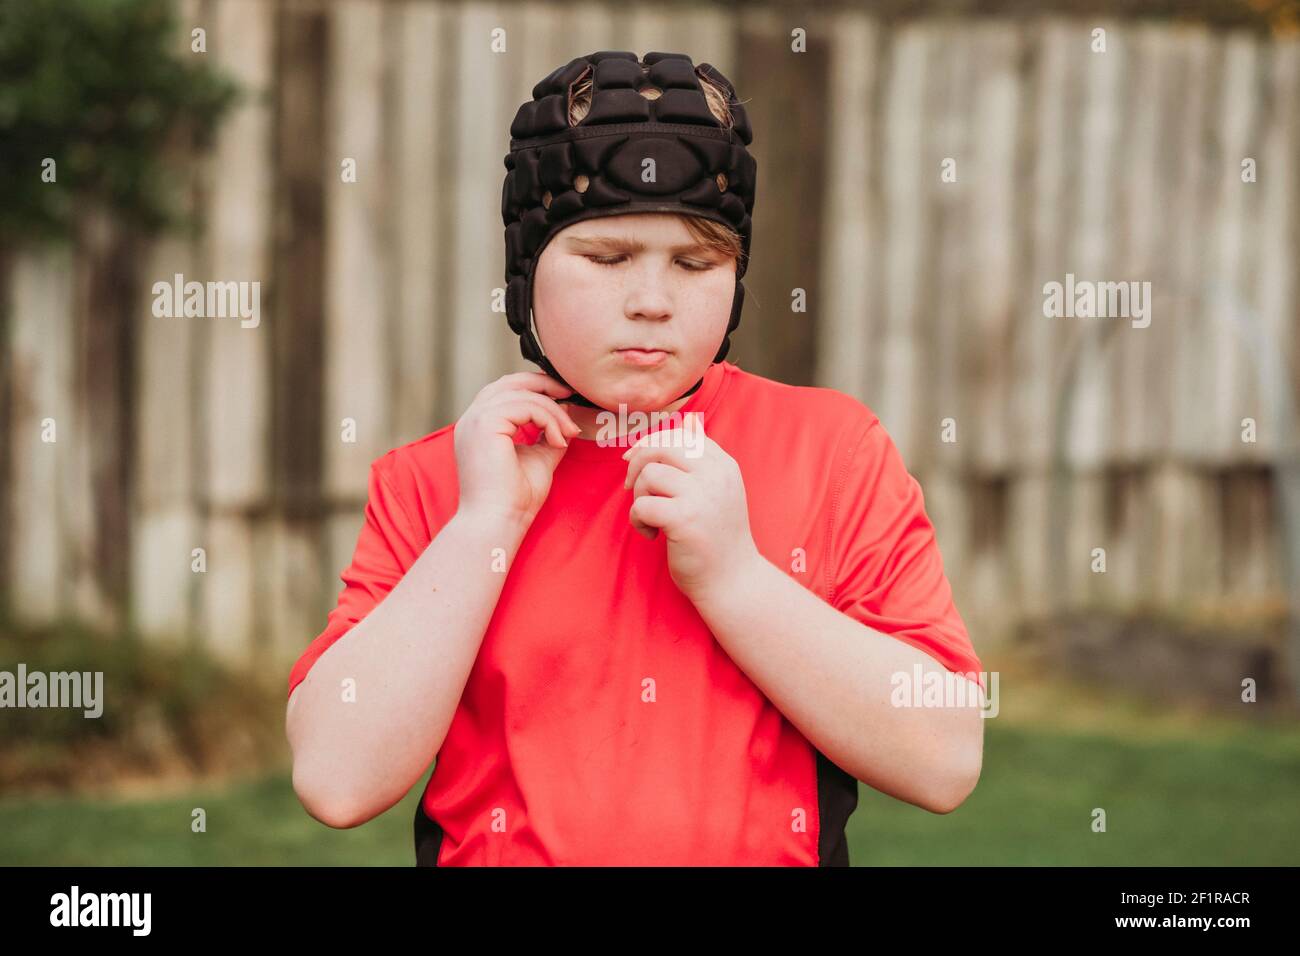 Boy putting on rugby protection head gear in backyard Stock Photo